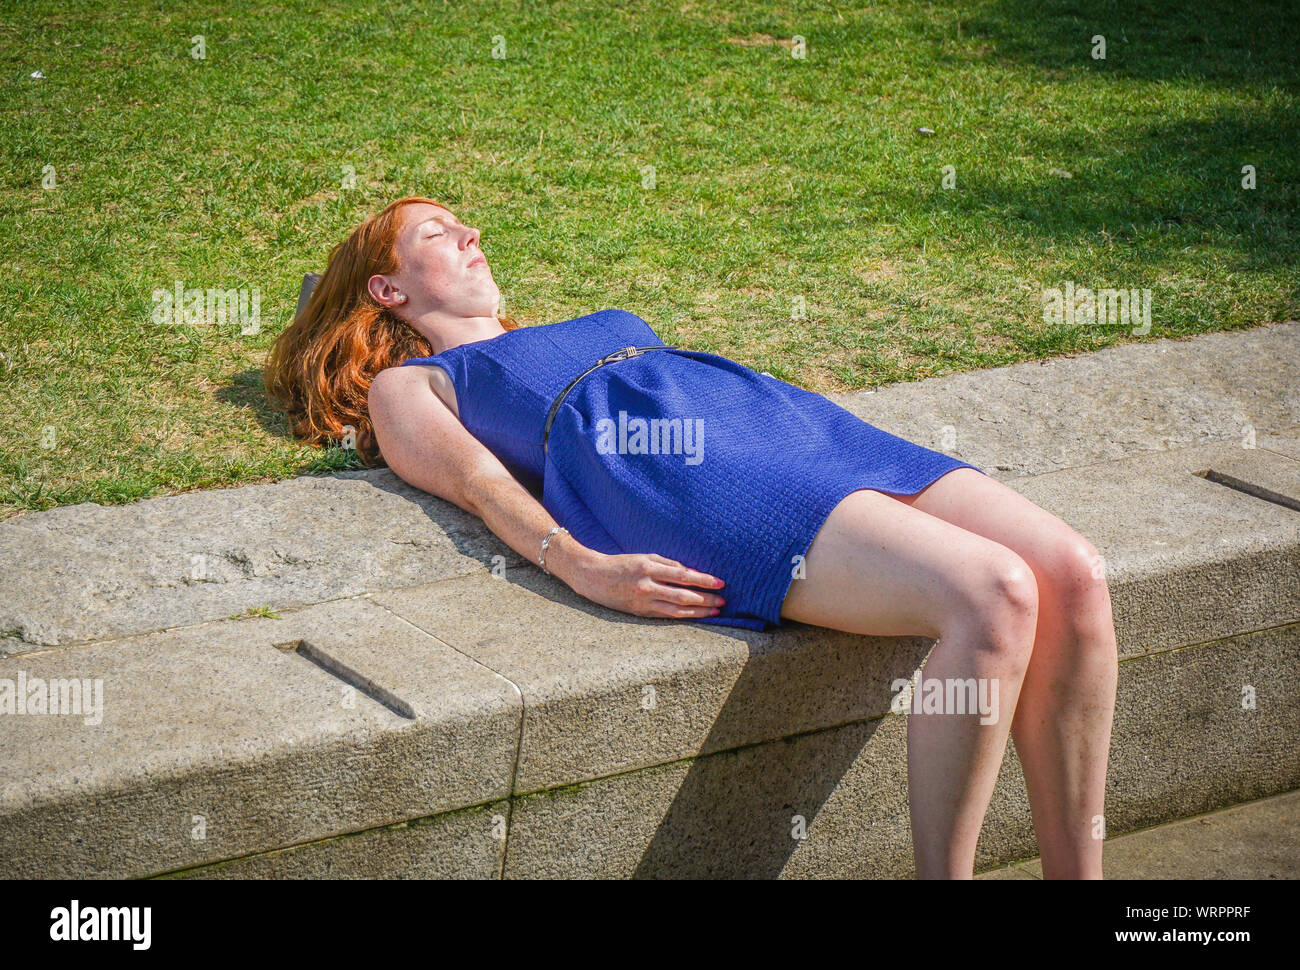 A woman seen sunbathing during a hot day in central London. (Photo by Ioannis Alexopoulos / Alamy ). Stock Photo